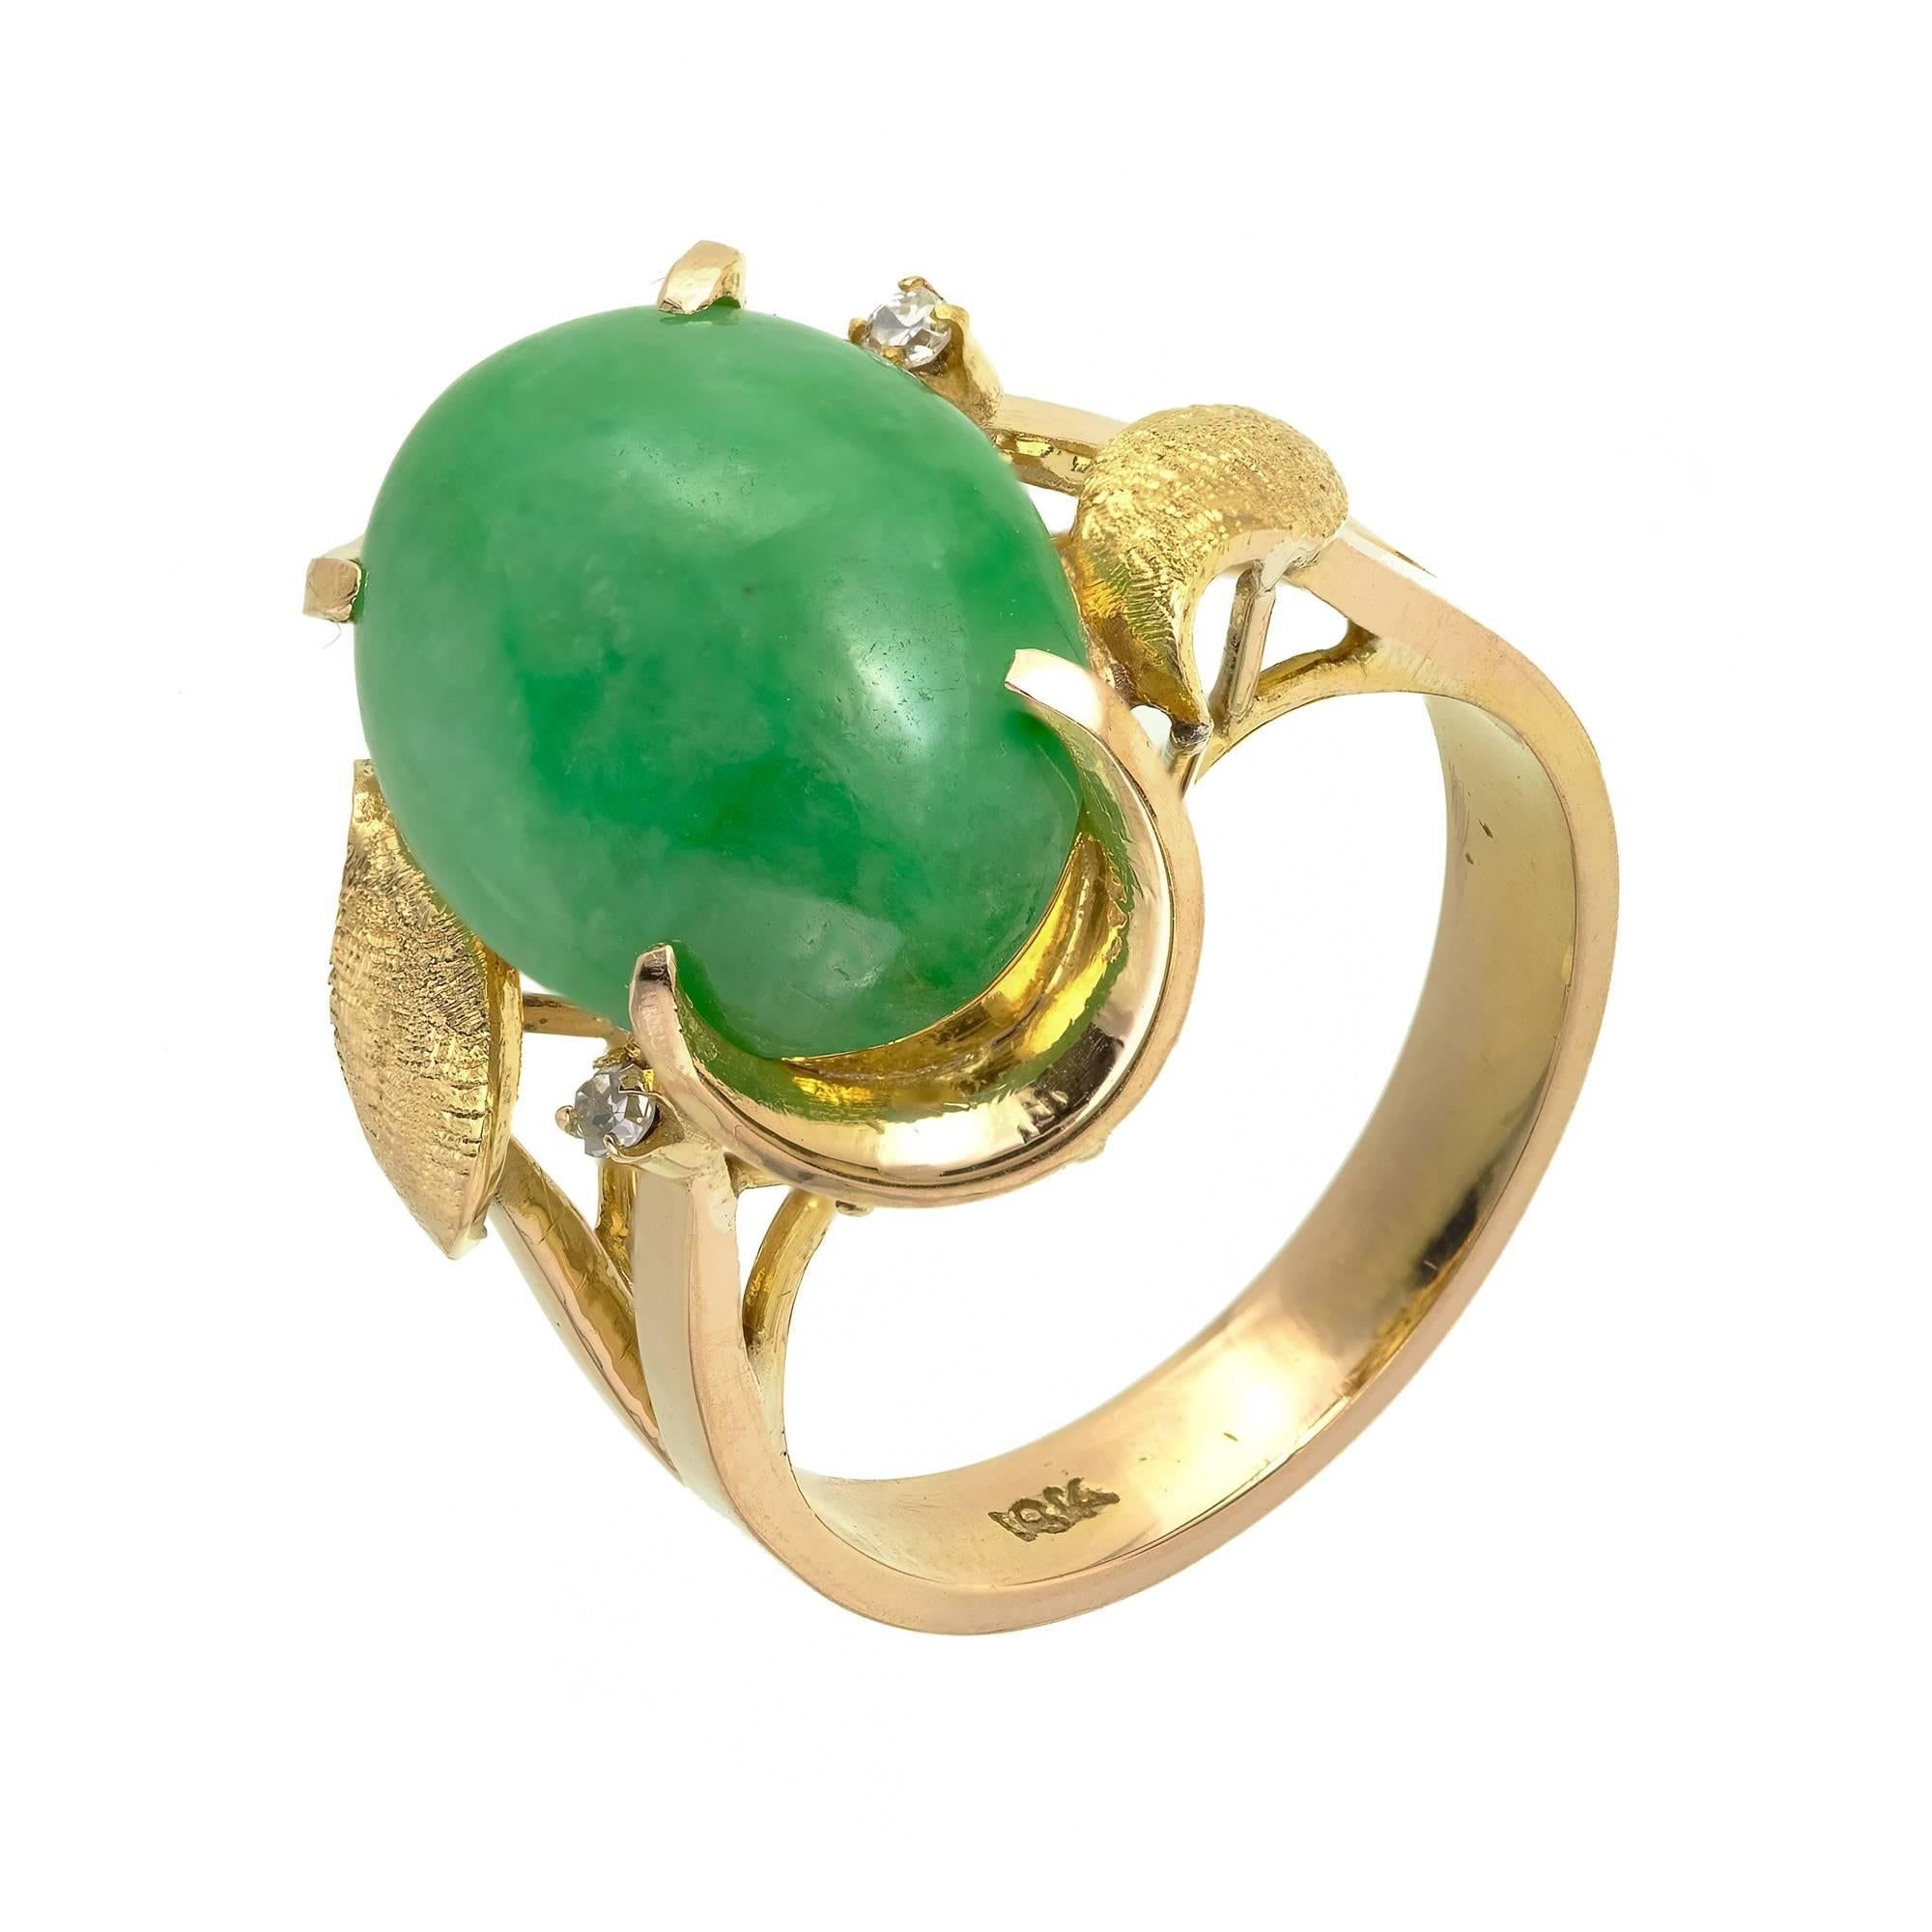 Natural Jadeite Jade mottled green ring in 18k yellow gold with shiny Diamond accents and hand textured gold leaves.

1 oval cabochon mottled green Jadeite Jade, 16.47 x 11.45 x 3.96mm, GIA certificate #2185636049
2 single cut Diamonds, approx.